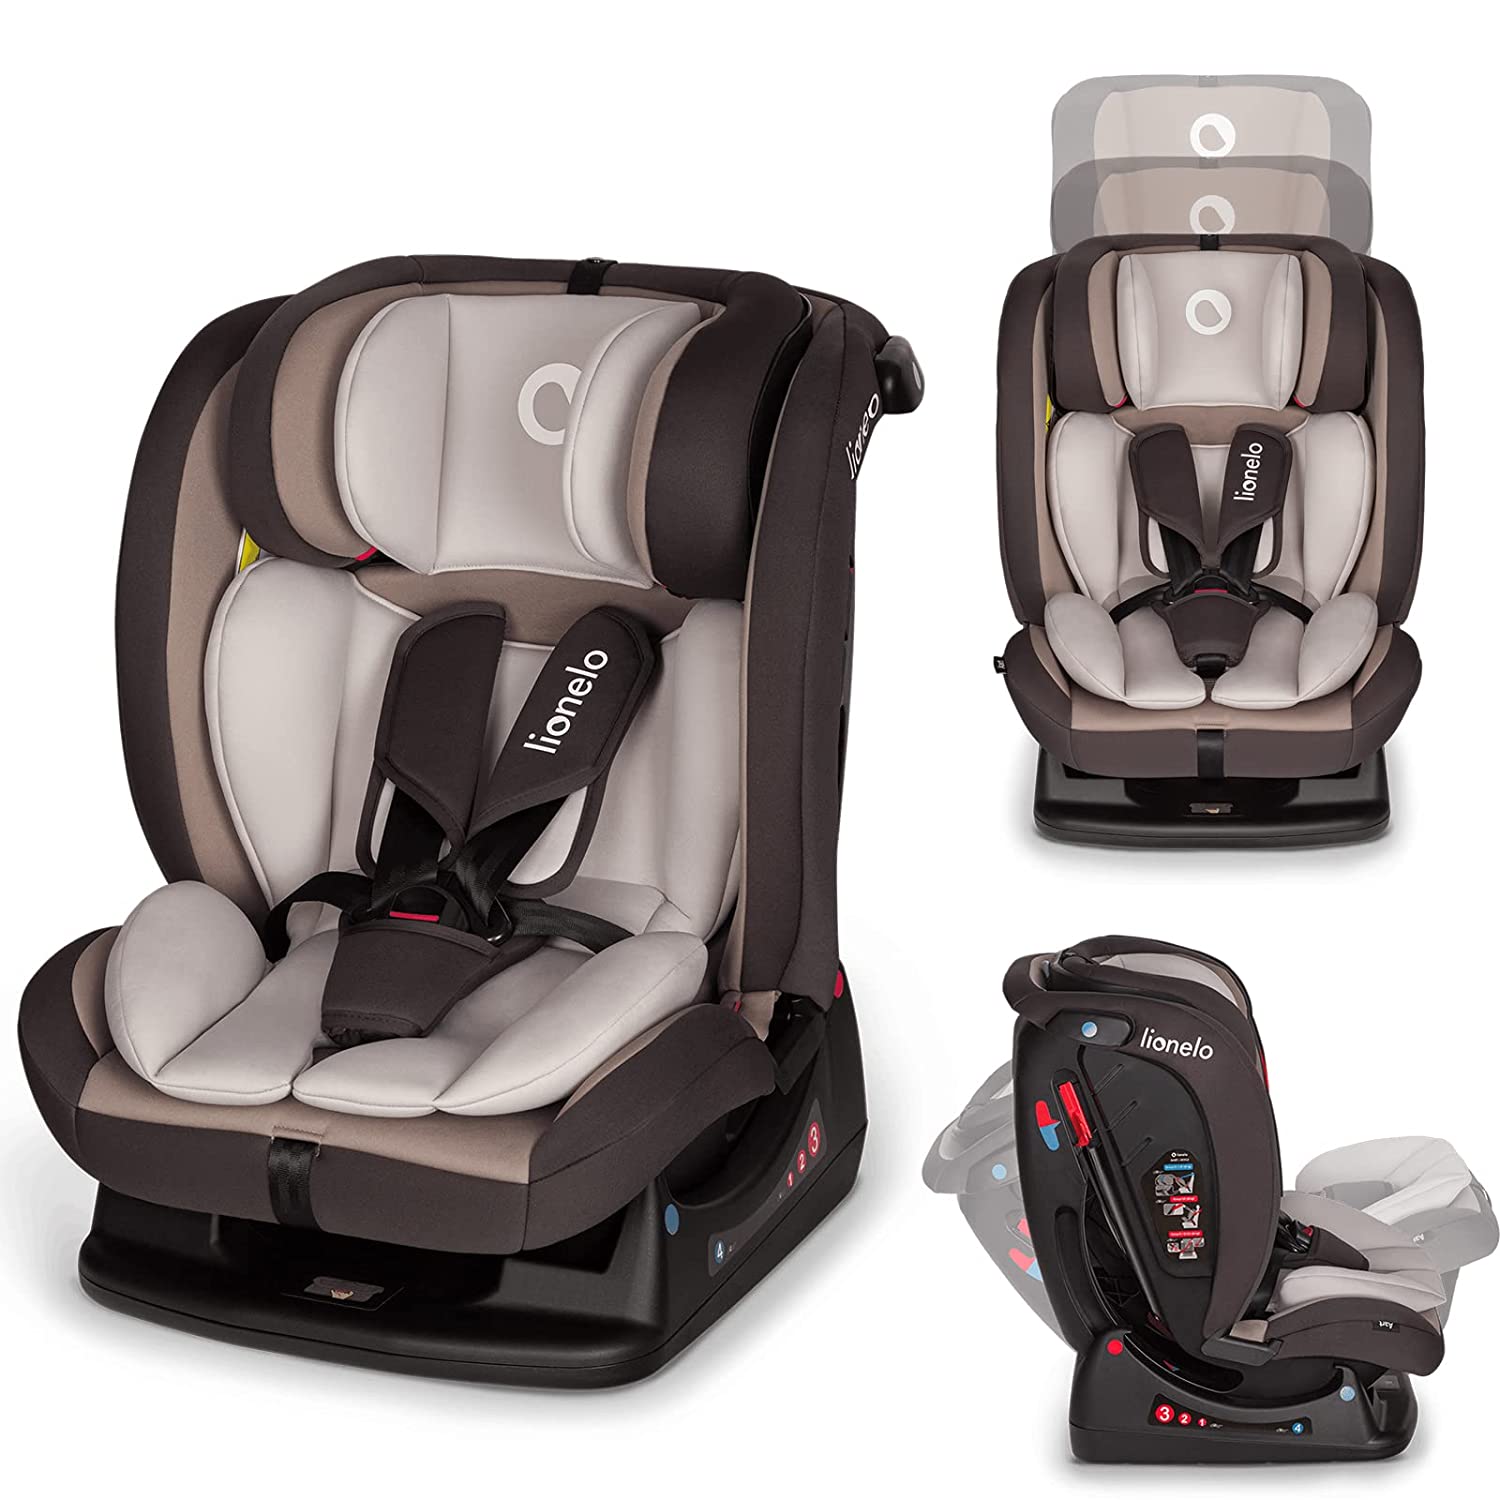 LIONELO Aart Child Car Seat from 0-36 kg, Group 0/1/2/3, ECE R44/04, 5-Point Harness System, Reverse Driving Option, Headrest and Tilt Adjustment, Additional Side Protection (Beige Lat)